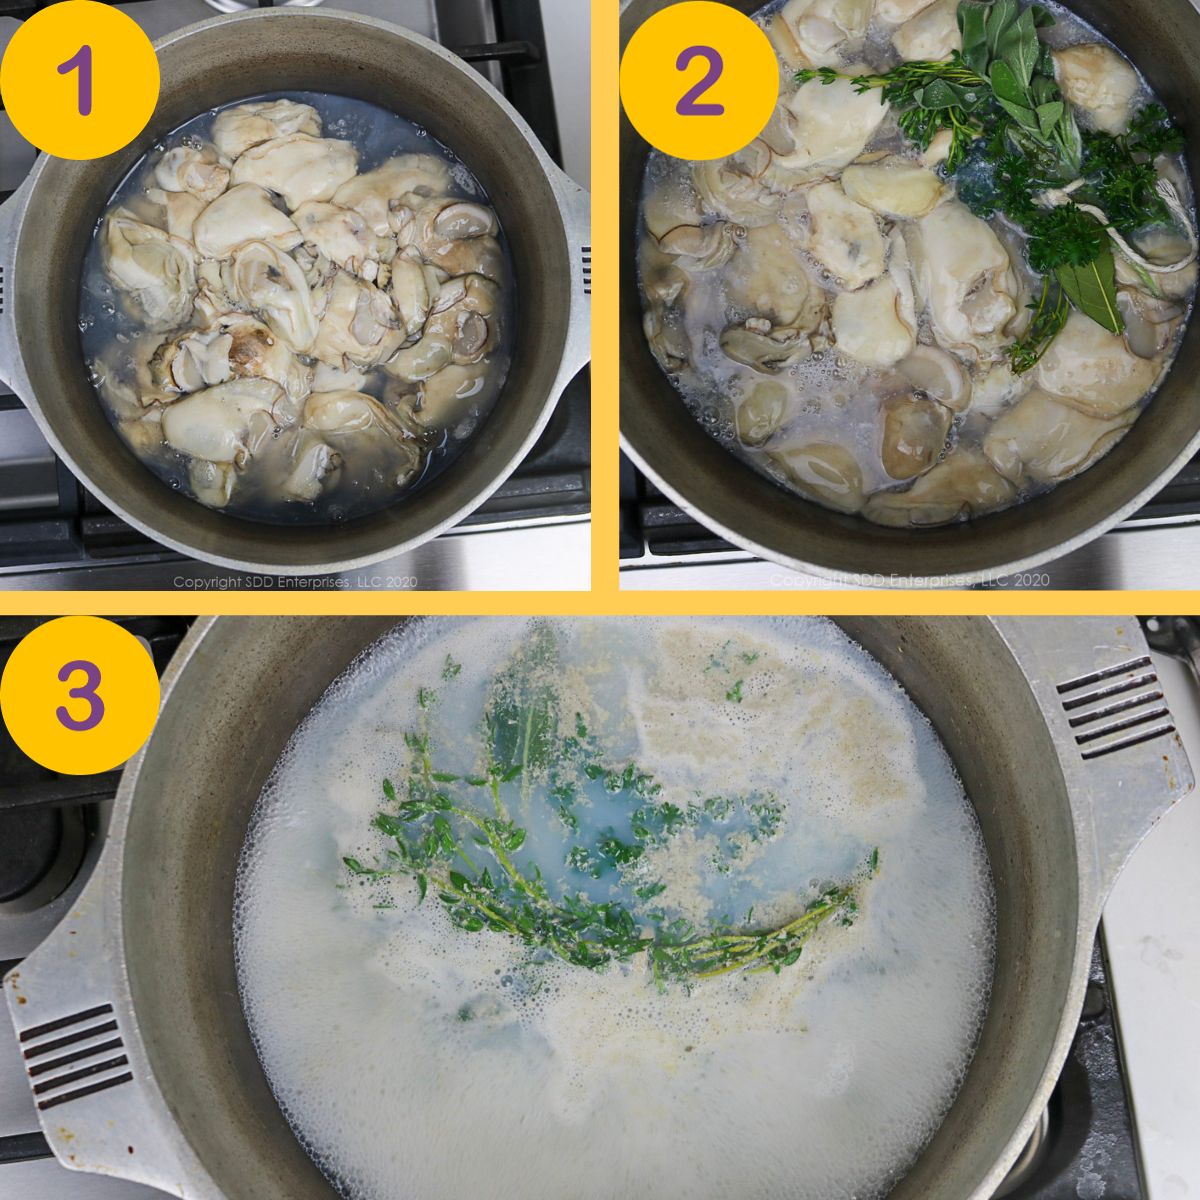 Cooking steps to prepare oysters for oyster soup.